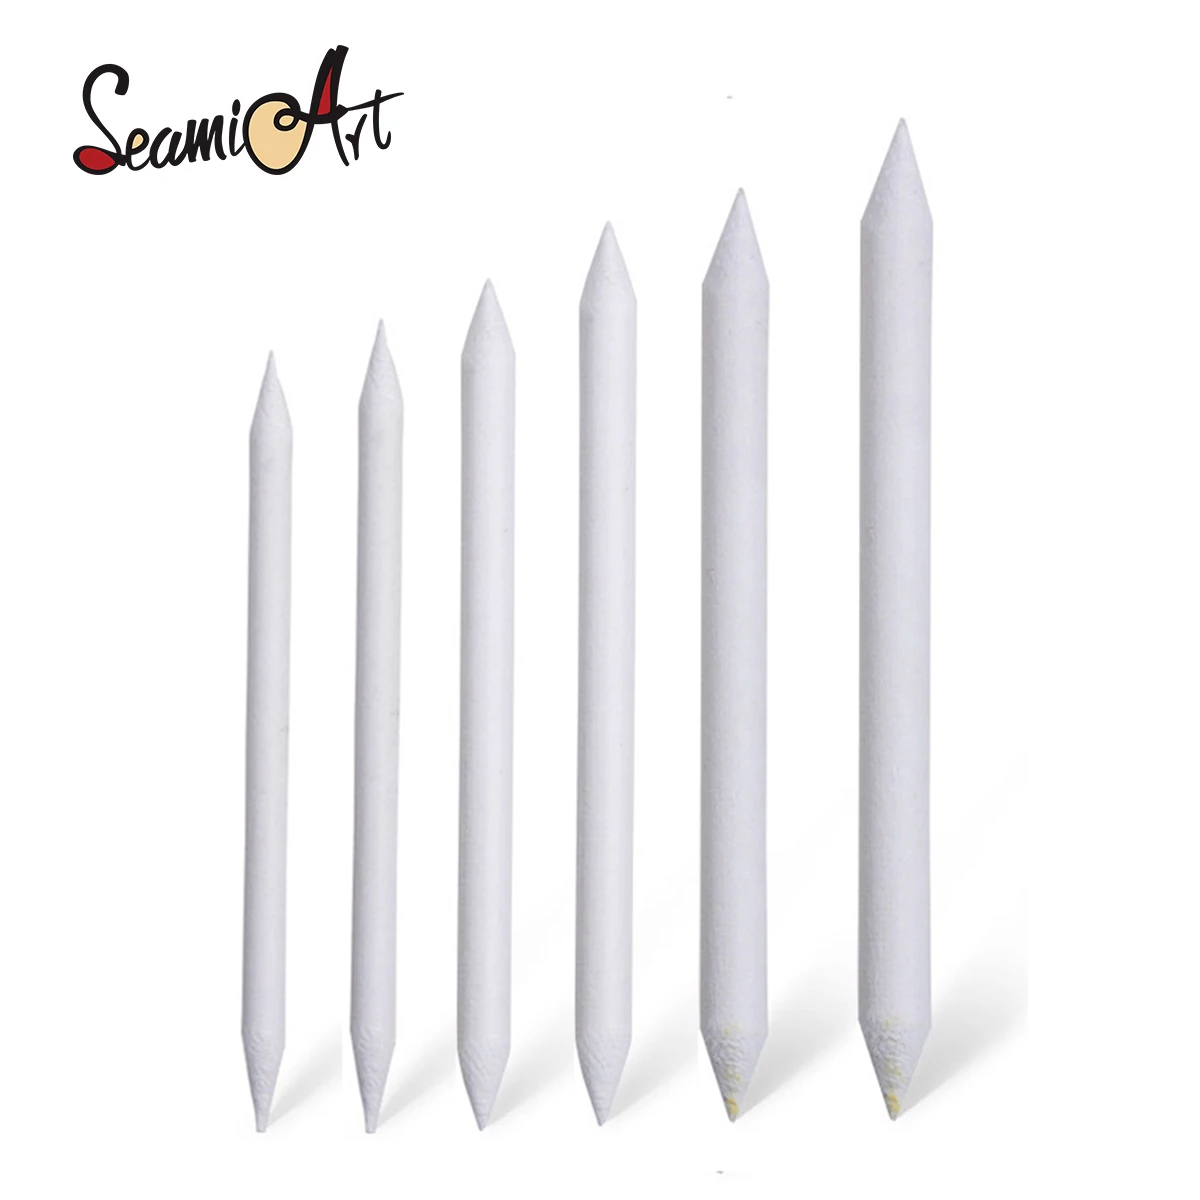 6pcs/set Blending Smudge Stump Stick Tortillon Sketch Art White Drawing Charcoal Sketcking Tool Rice Paper Pen Supplies diy silicone painting mat pigment palette non stick craft mat for painting ink blending watercoloring stamping crafting tool